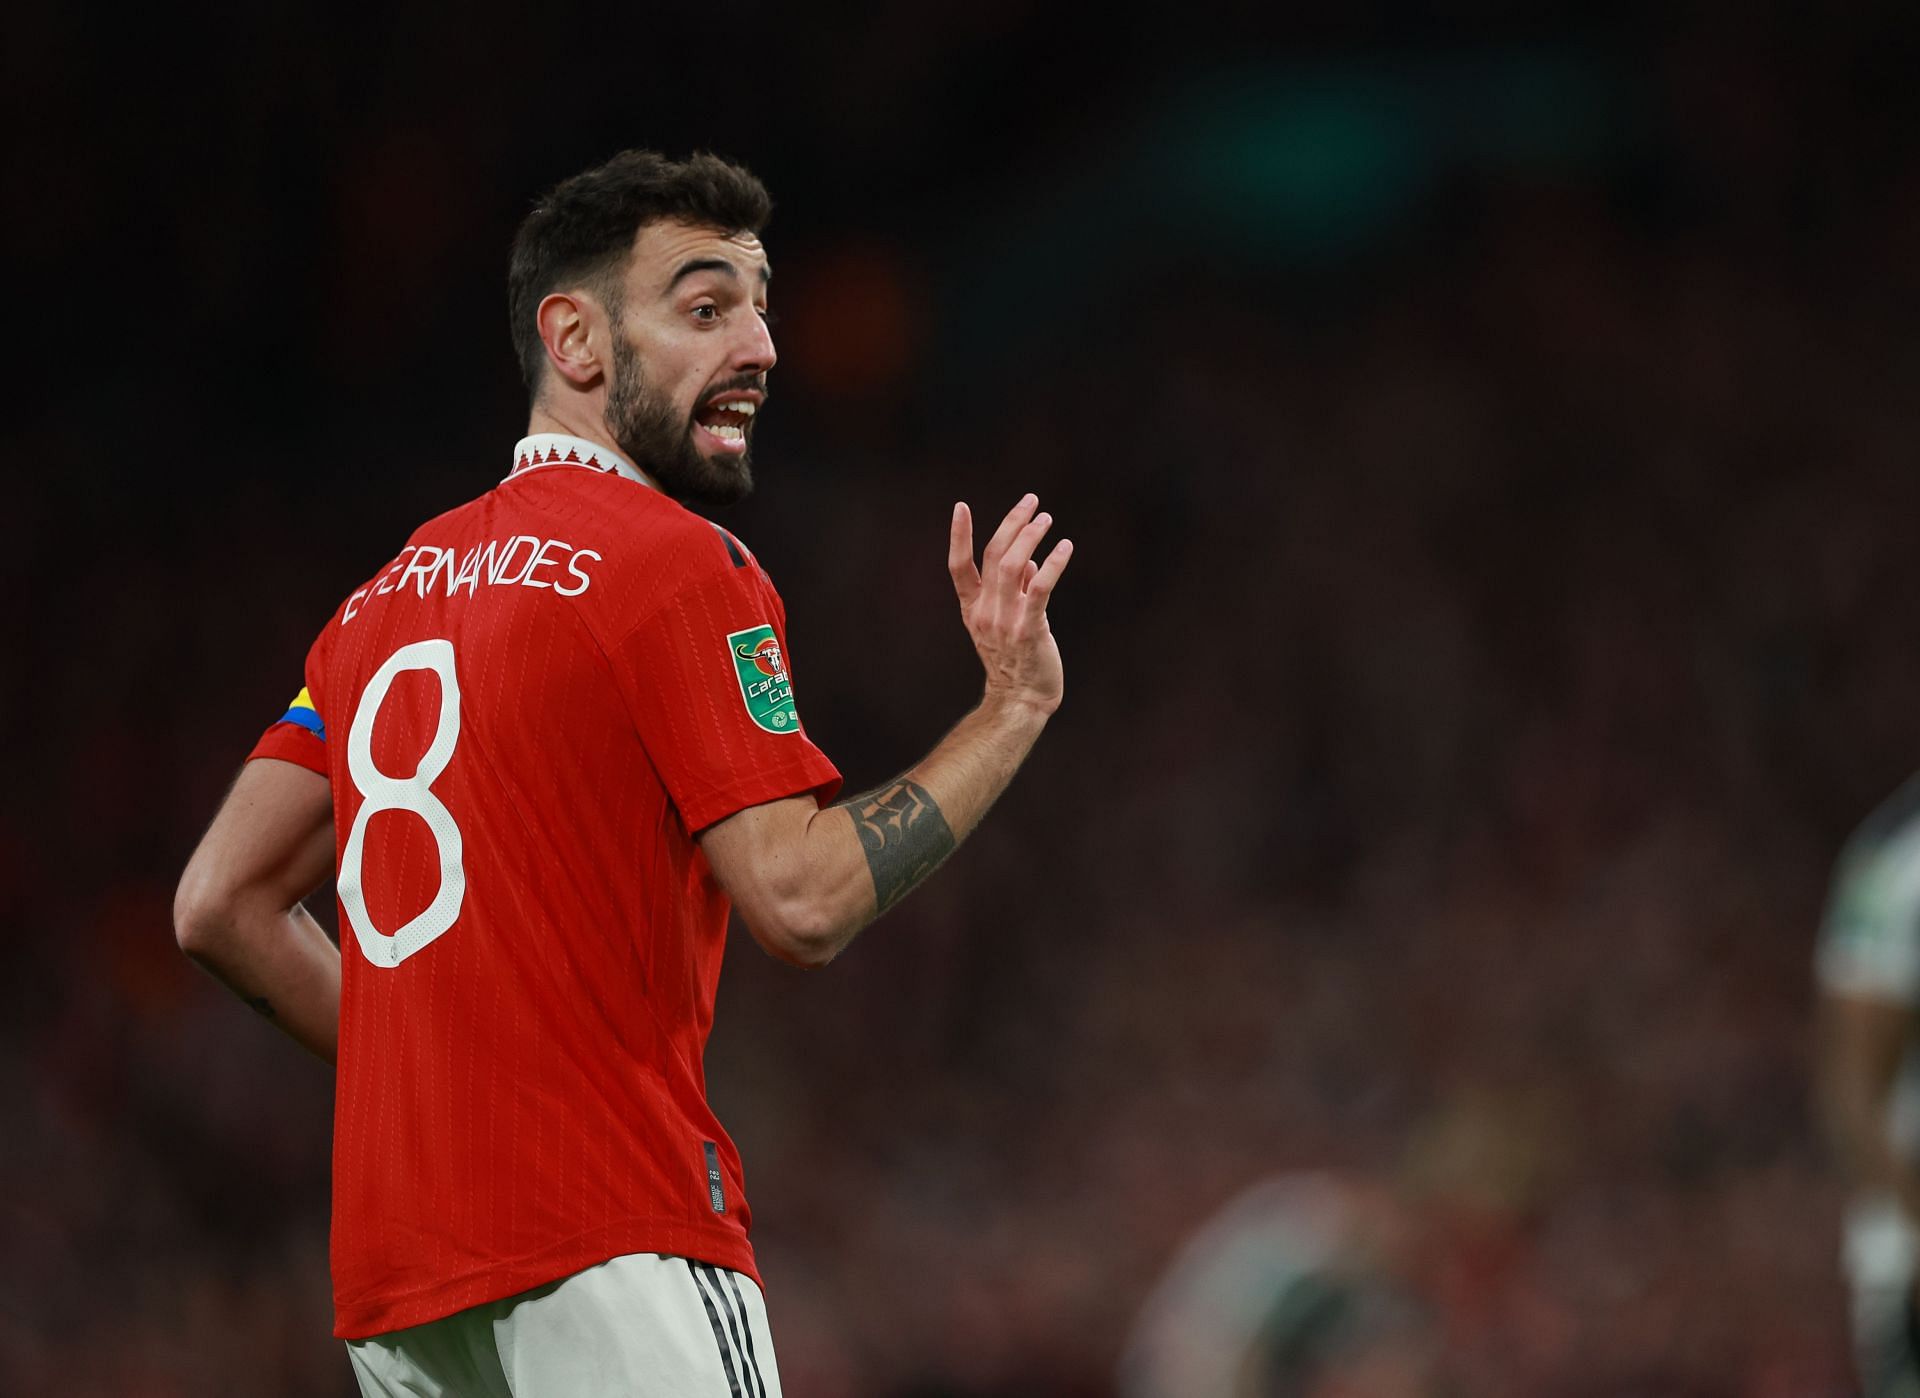 Bruno Fernandes has been indispensable for Manchester United since arriving at the club.